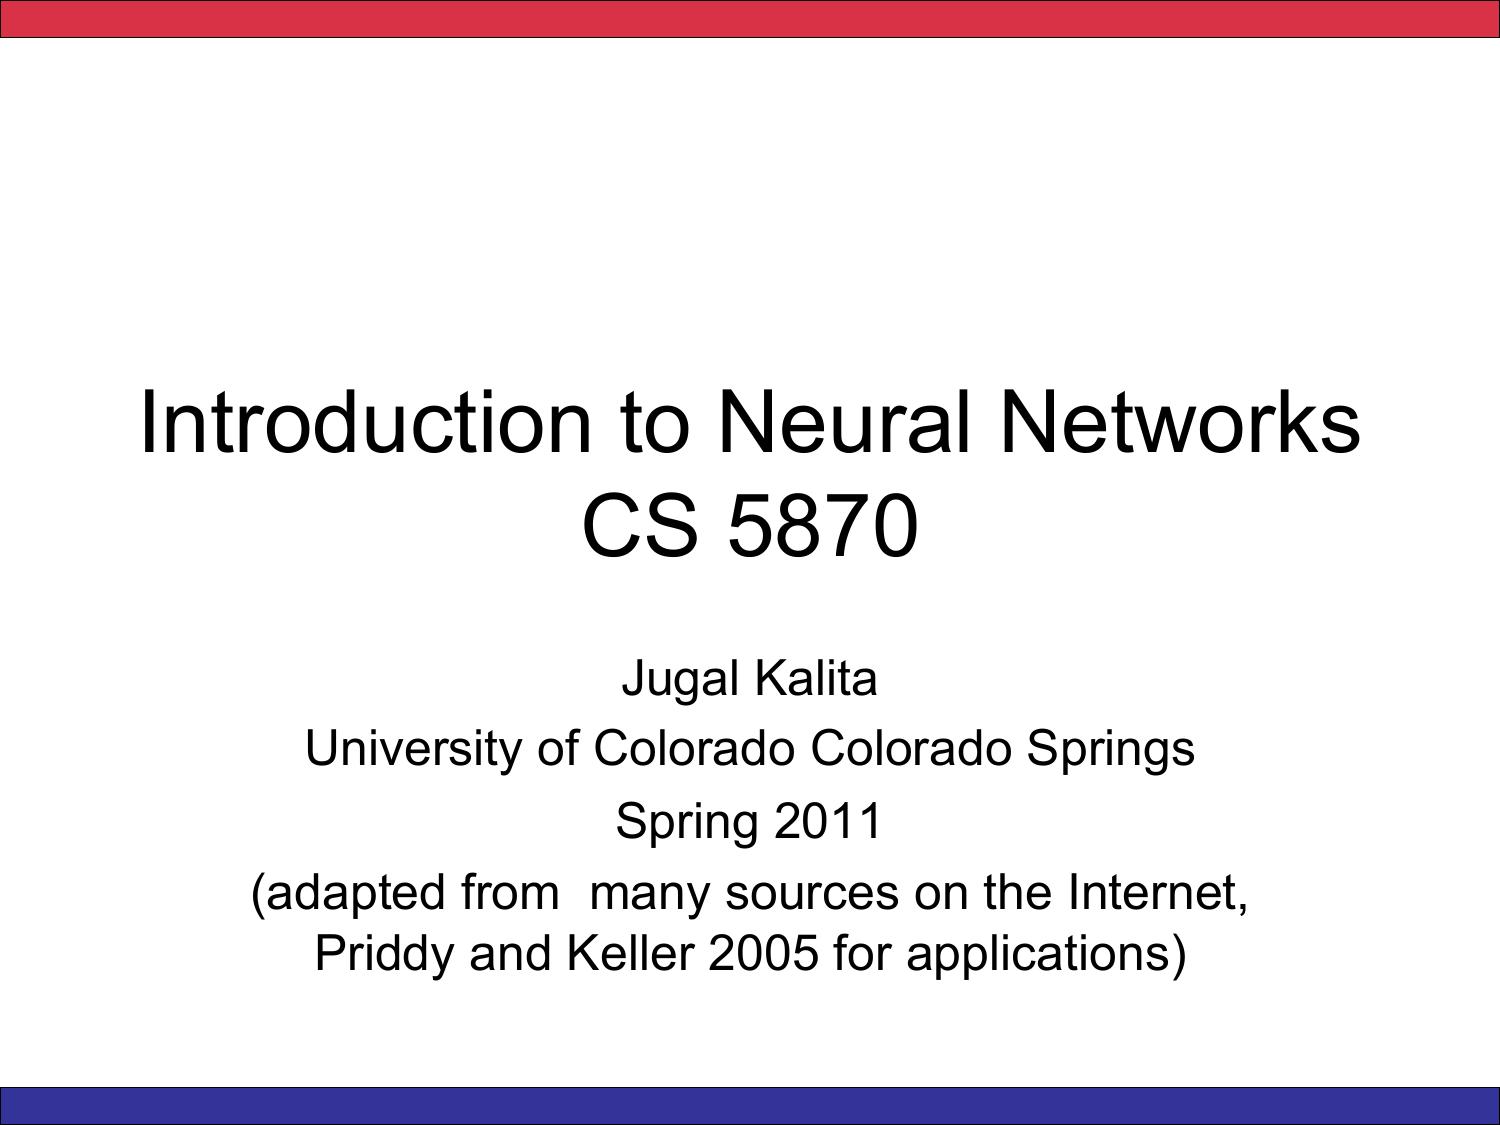 Introduction to Neural Networks 2011